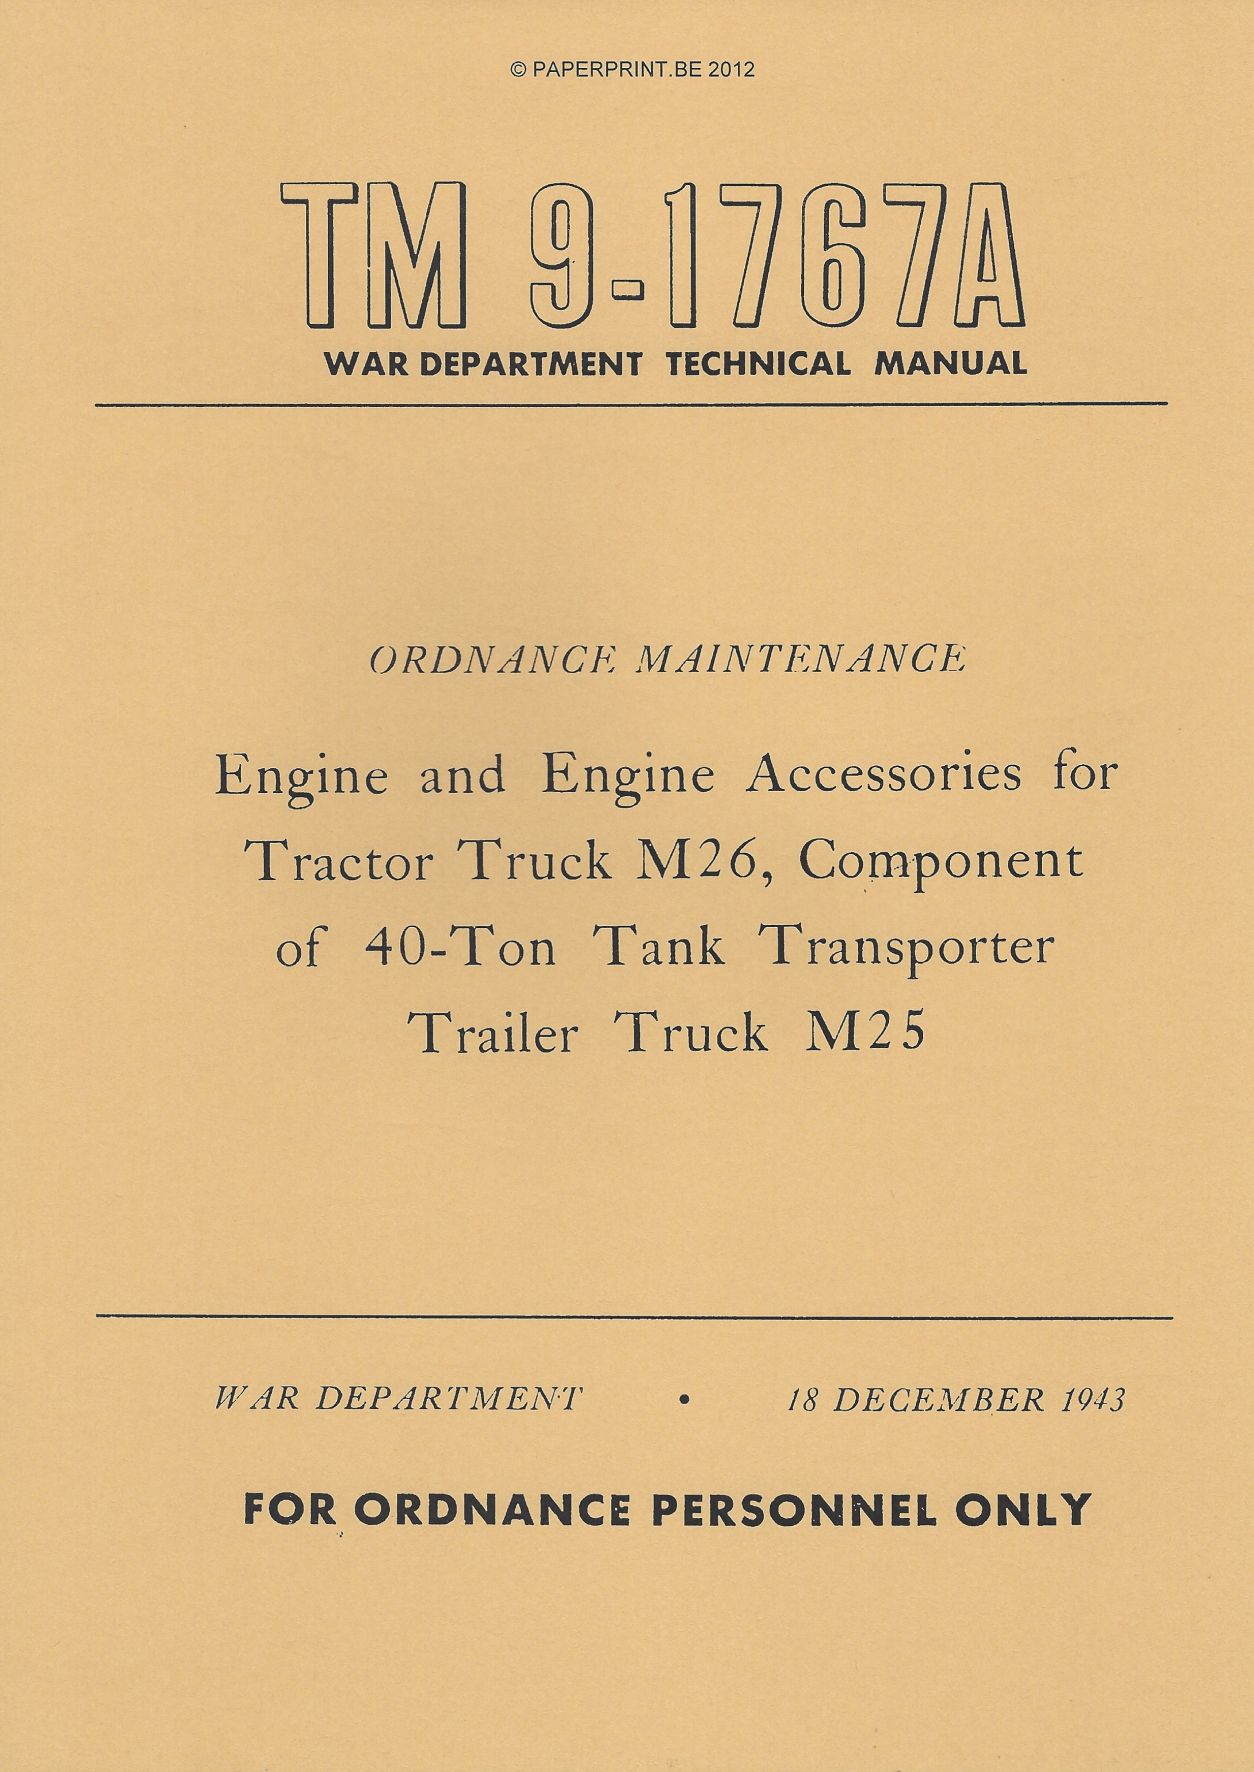 TM 9-1767A US ENGINE AND ENGINE ACCESSORIES FOR TRACTOR TRUCK M26, COMPONENT OF 40-TON TANK TRANSPORTER TRAILER TRUCK M25